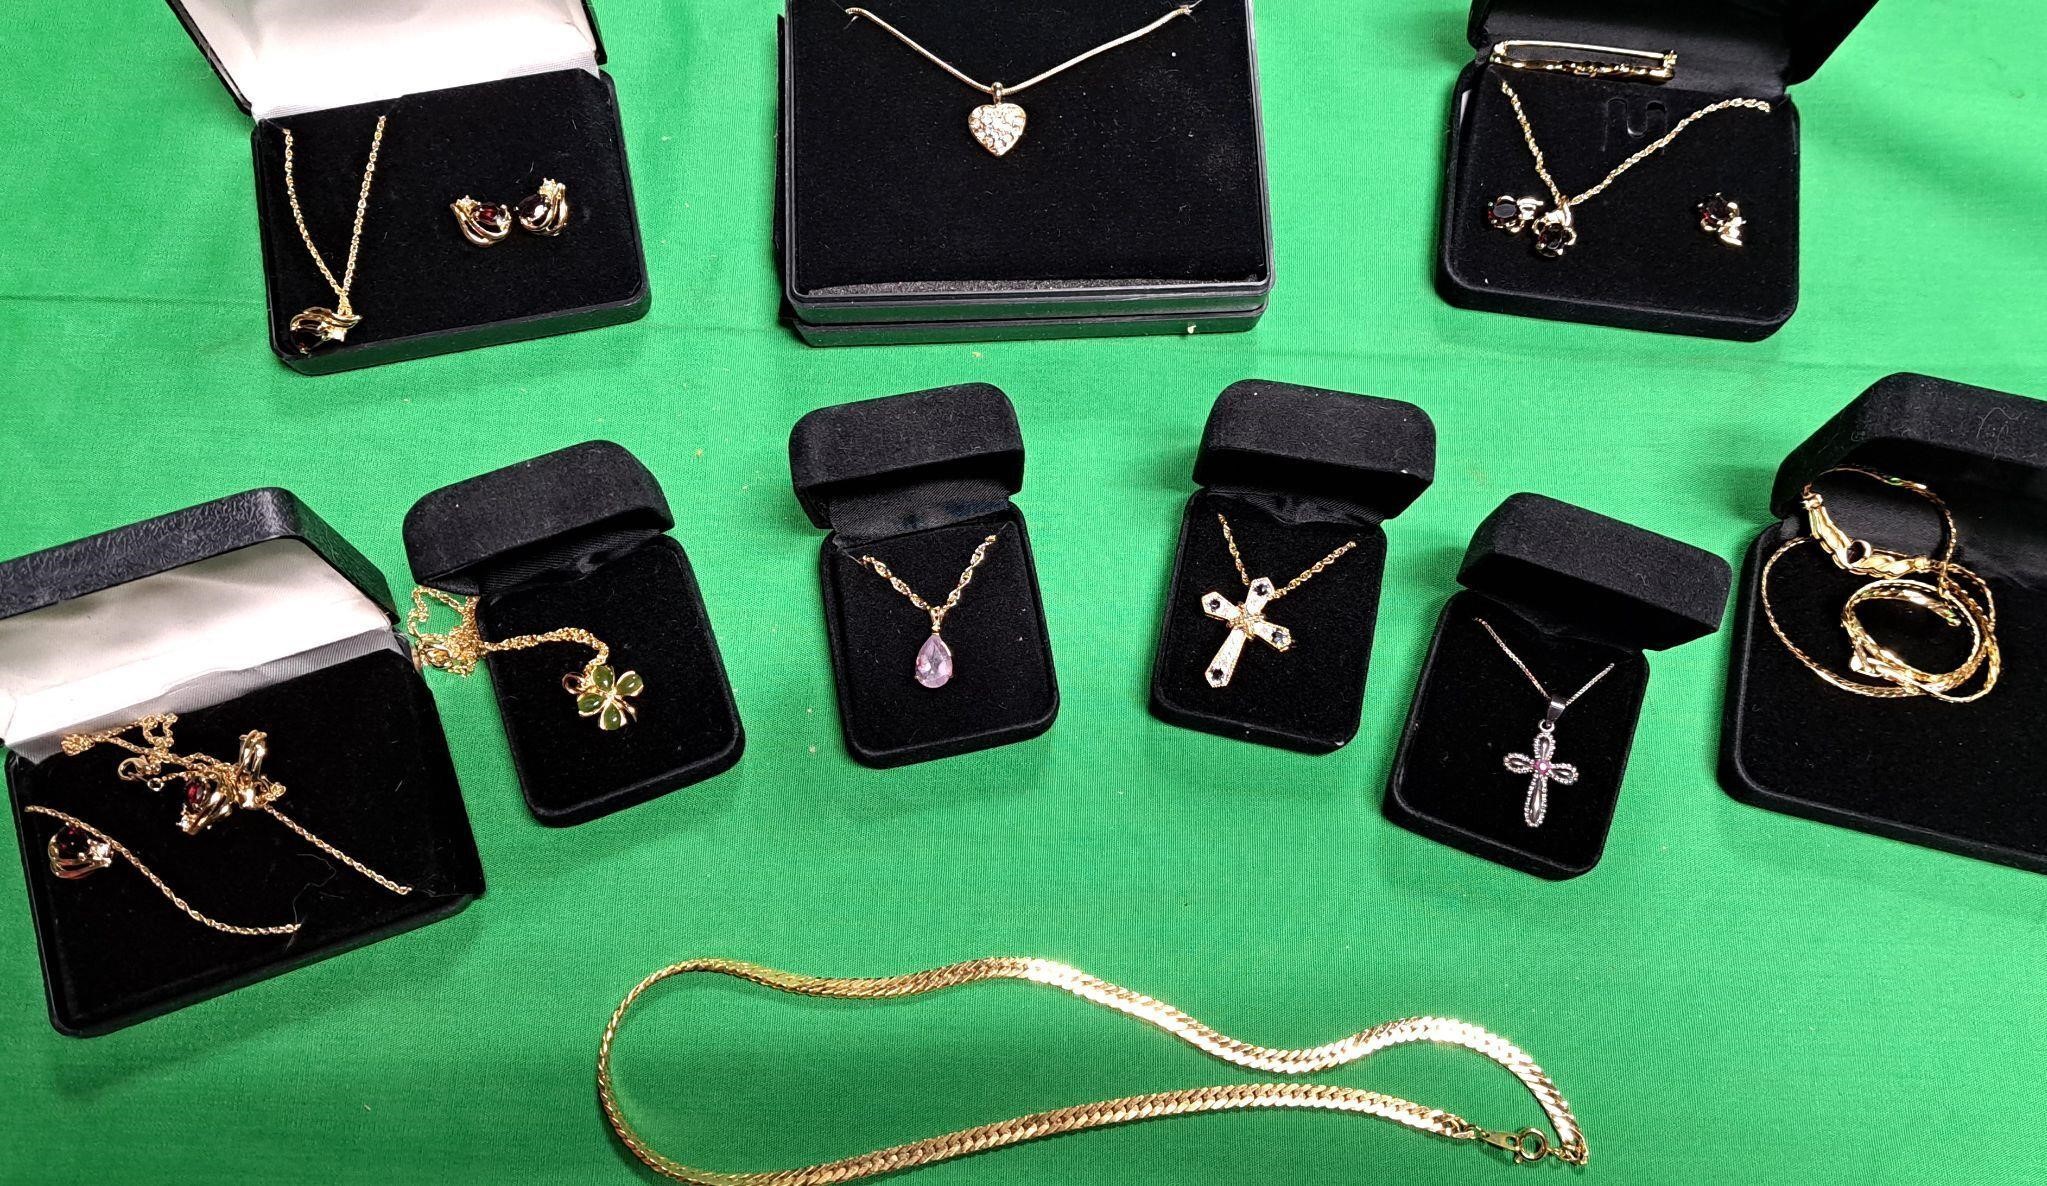 LOT OF COSTUME JEWELRY IN BLACK BOXES NECKLACES